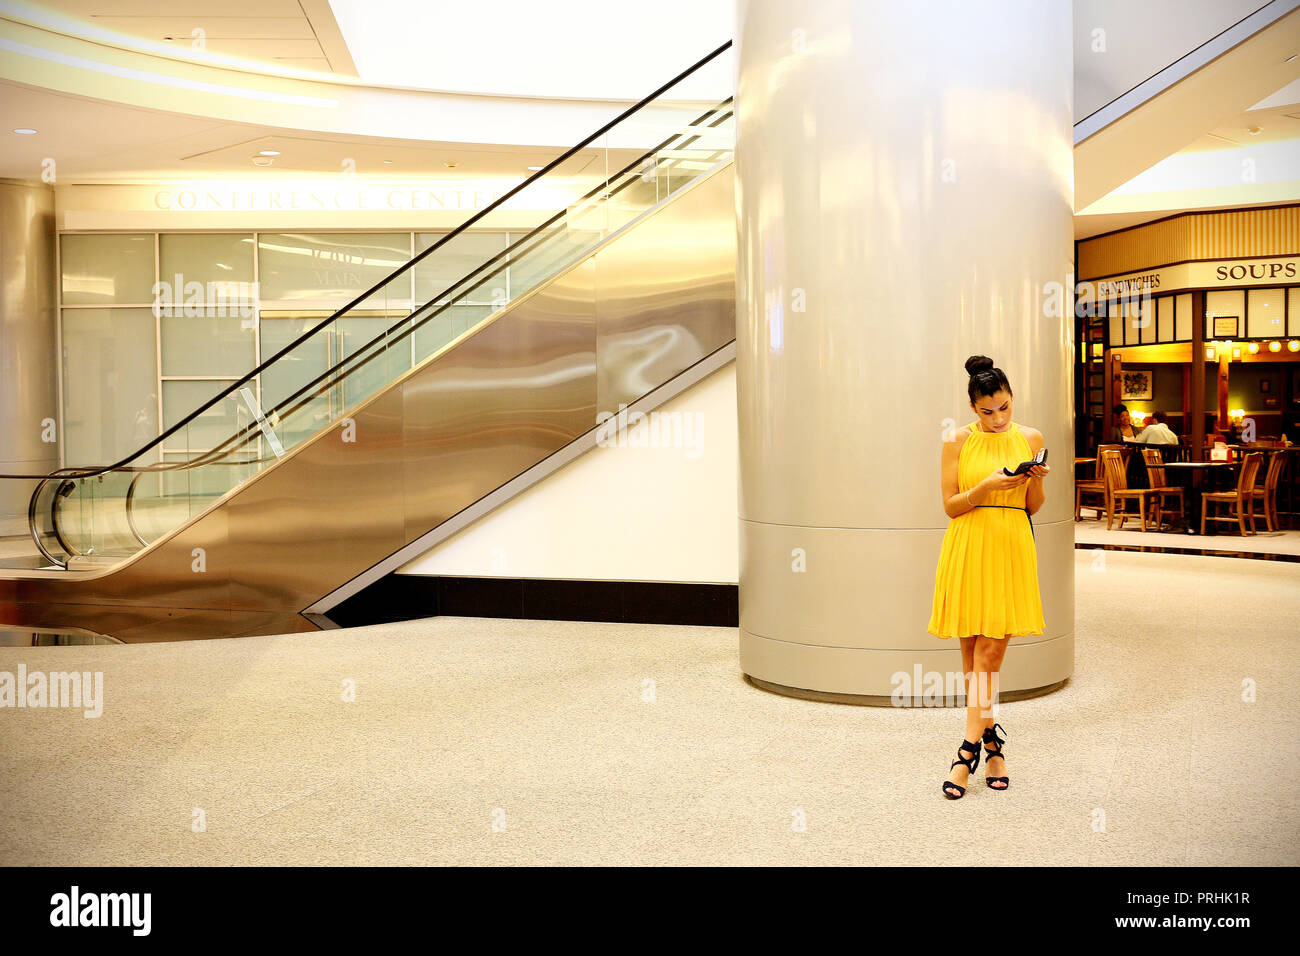 Houston, Usa - June 20, 2018: Unidentified lady in yellow reading in the Underground city in Houston, Texas Stock Photo